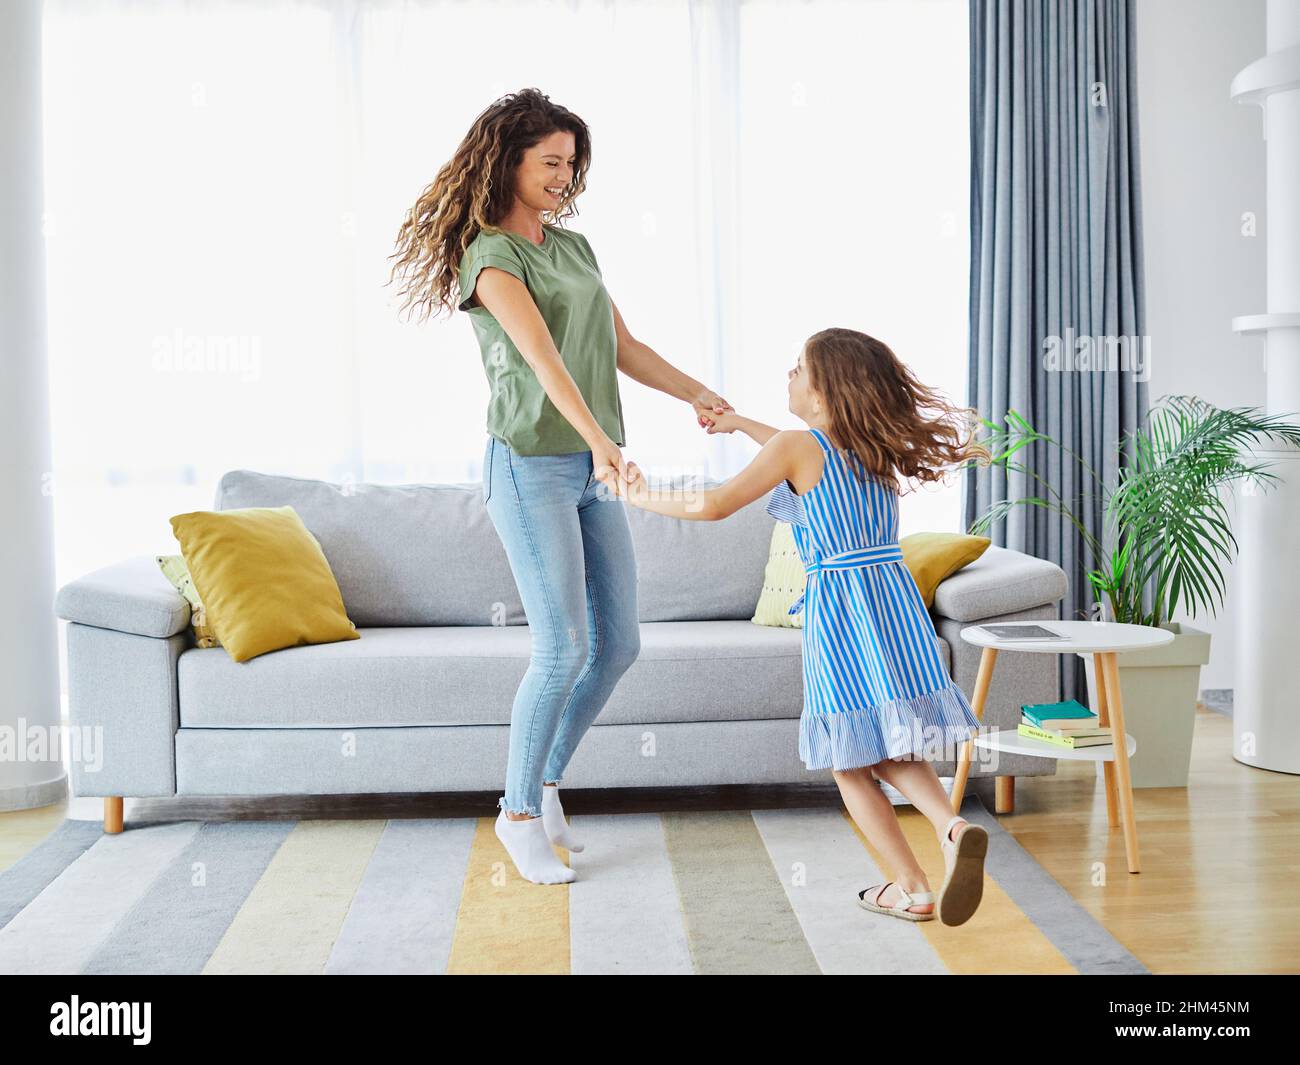 child daughter mother family happy playing kid childhood dancing parent home woman girl Stock Photo